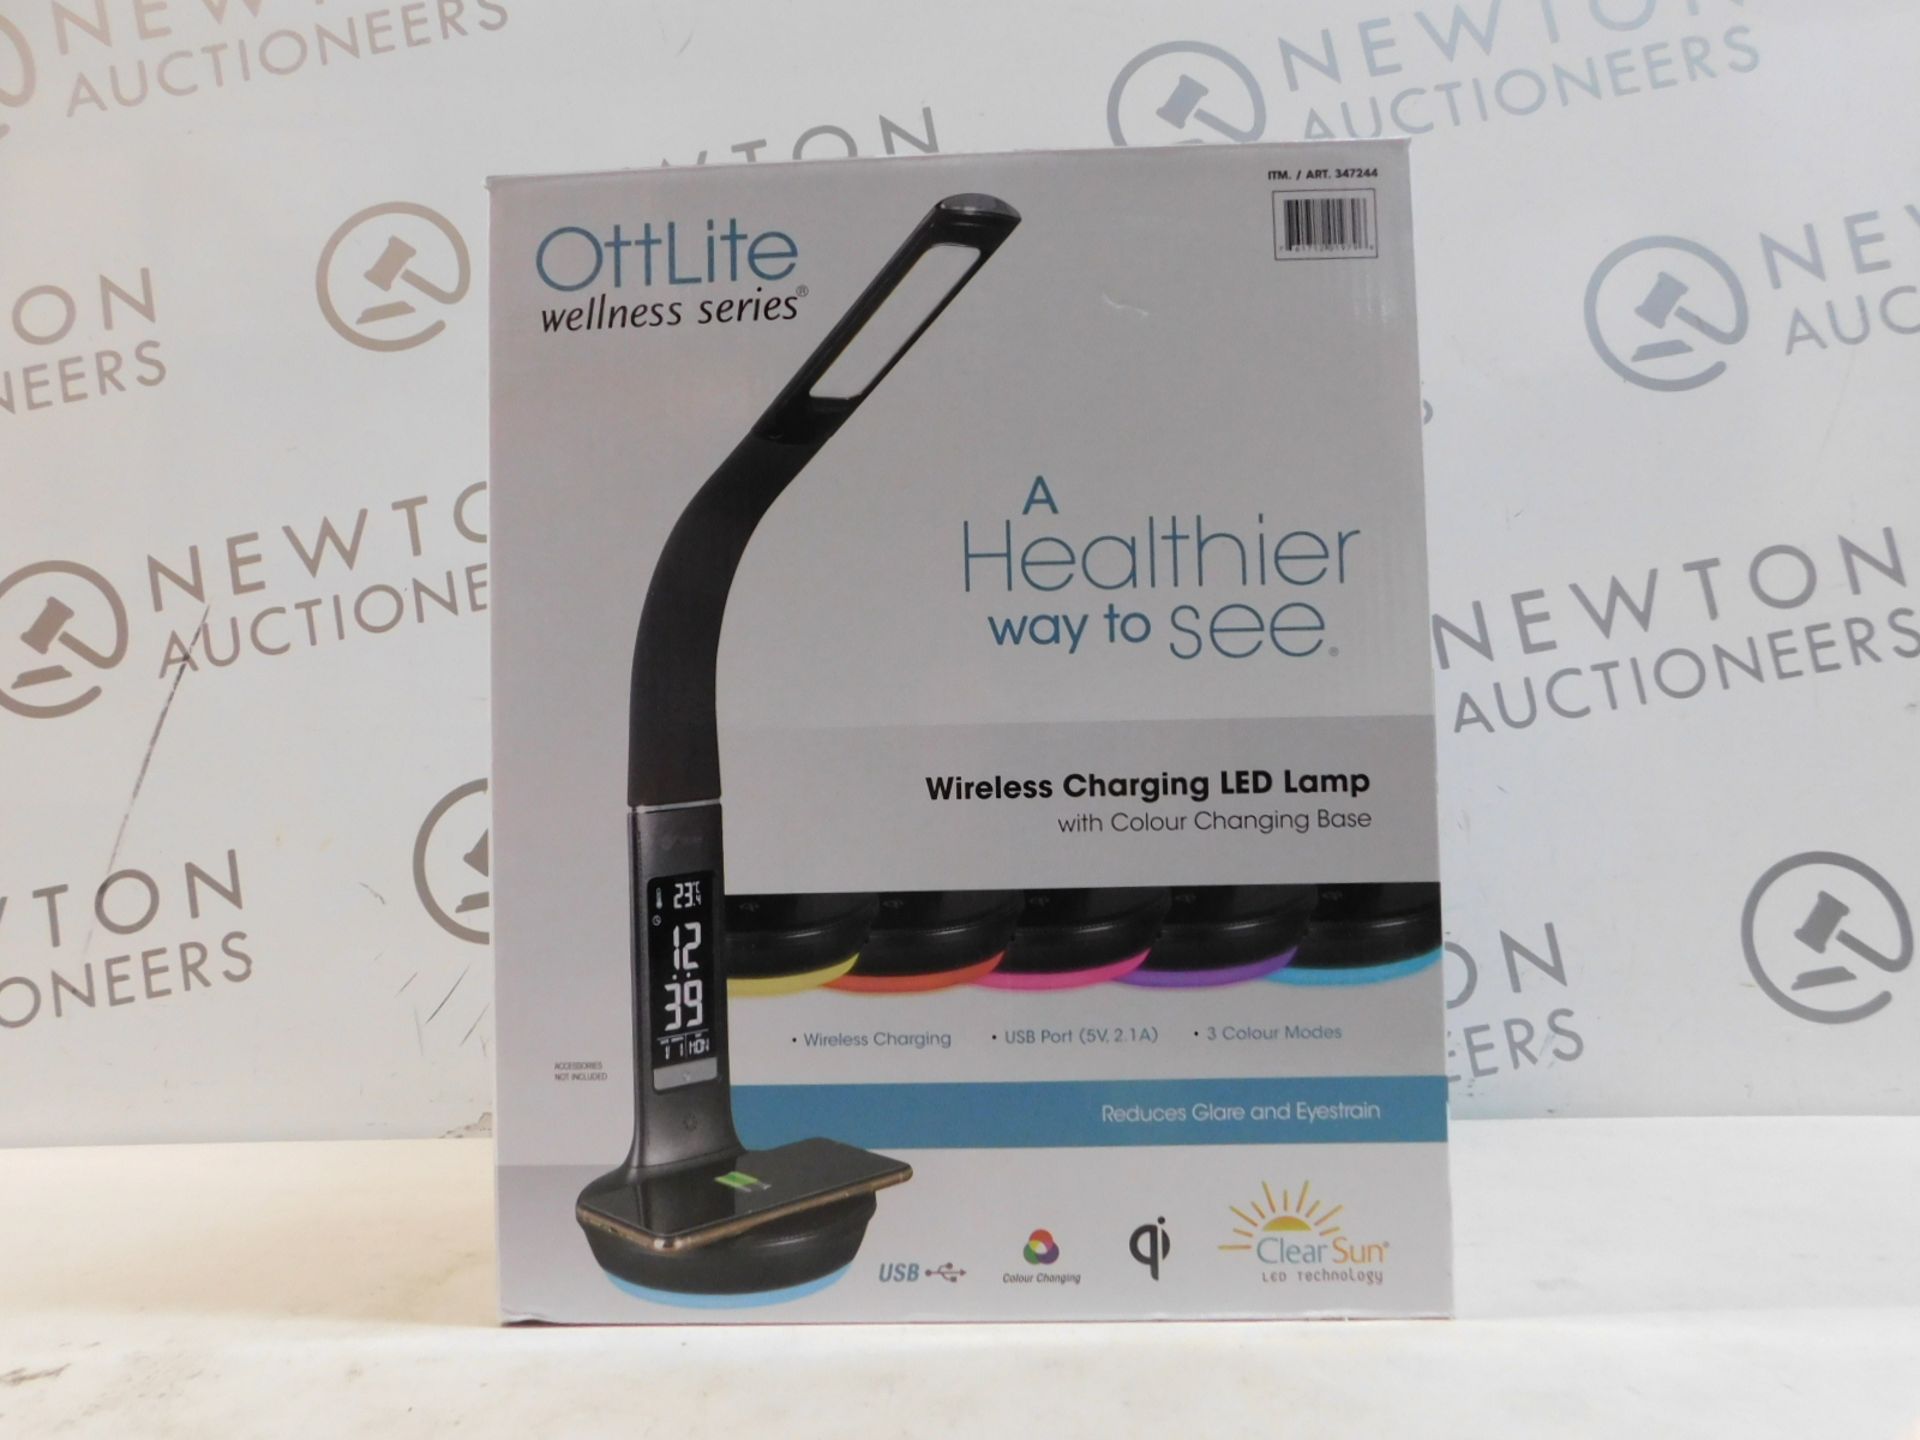 1 BOXED OTTLITE EXECUTIVE LED DESK LAMP WITH WIRELESS CHARGING RRP Â£49.99